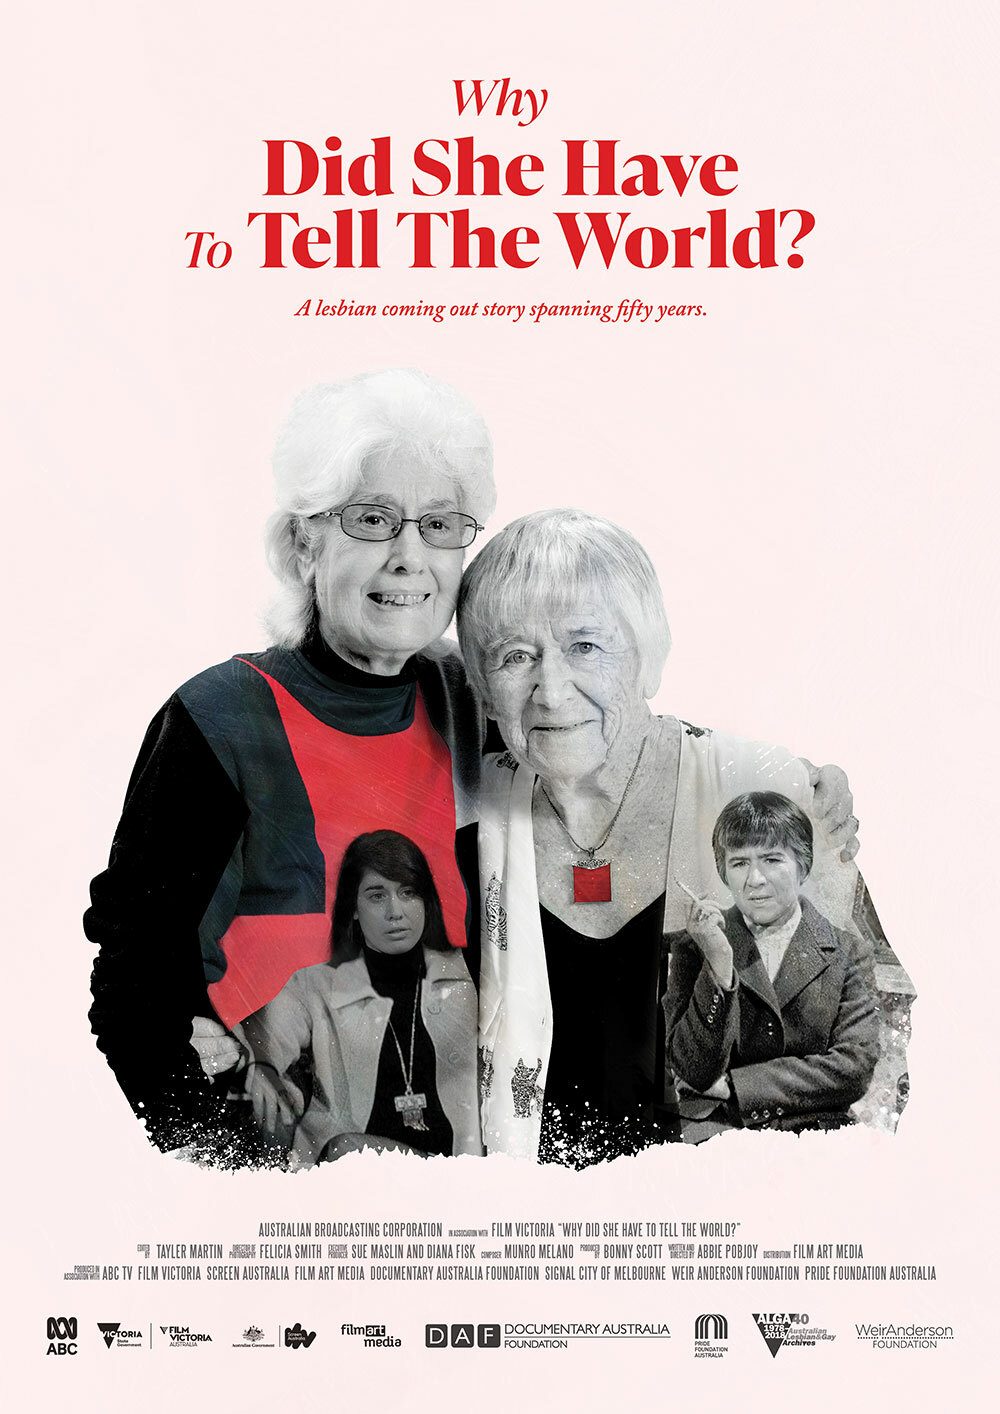 Book - Why did she have to tell the world?